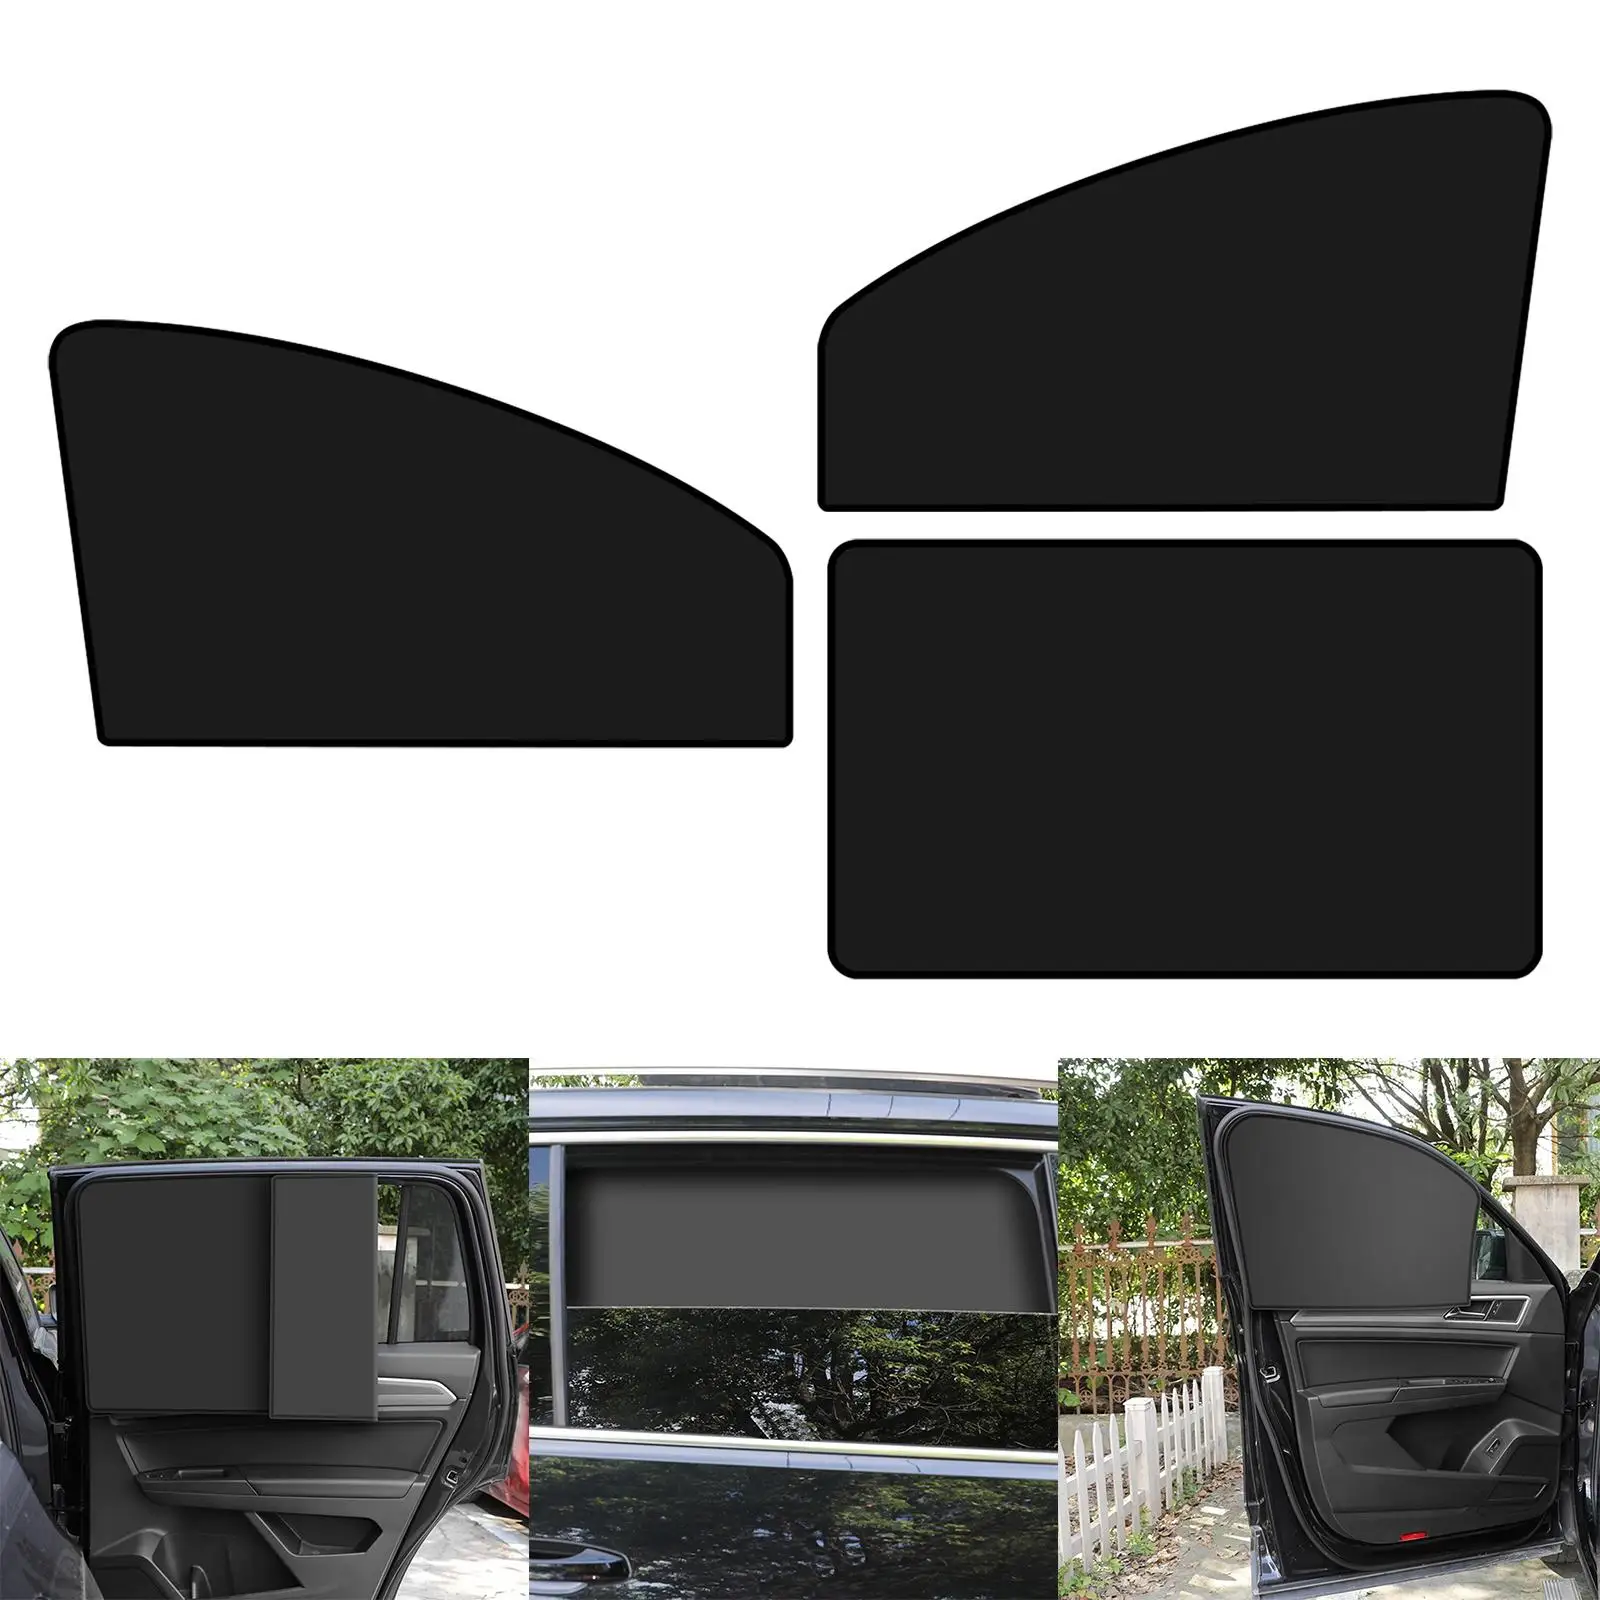 Universal Magnetic Car Window Sunshade Blackout Maintains Car Interior Temperature Sun Shade Covers for Camping Baby